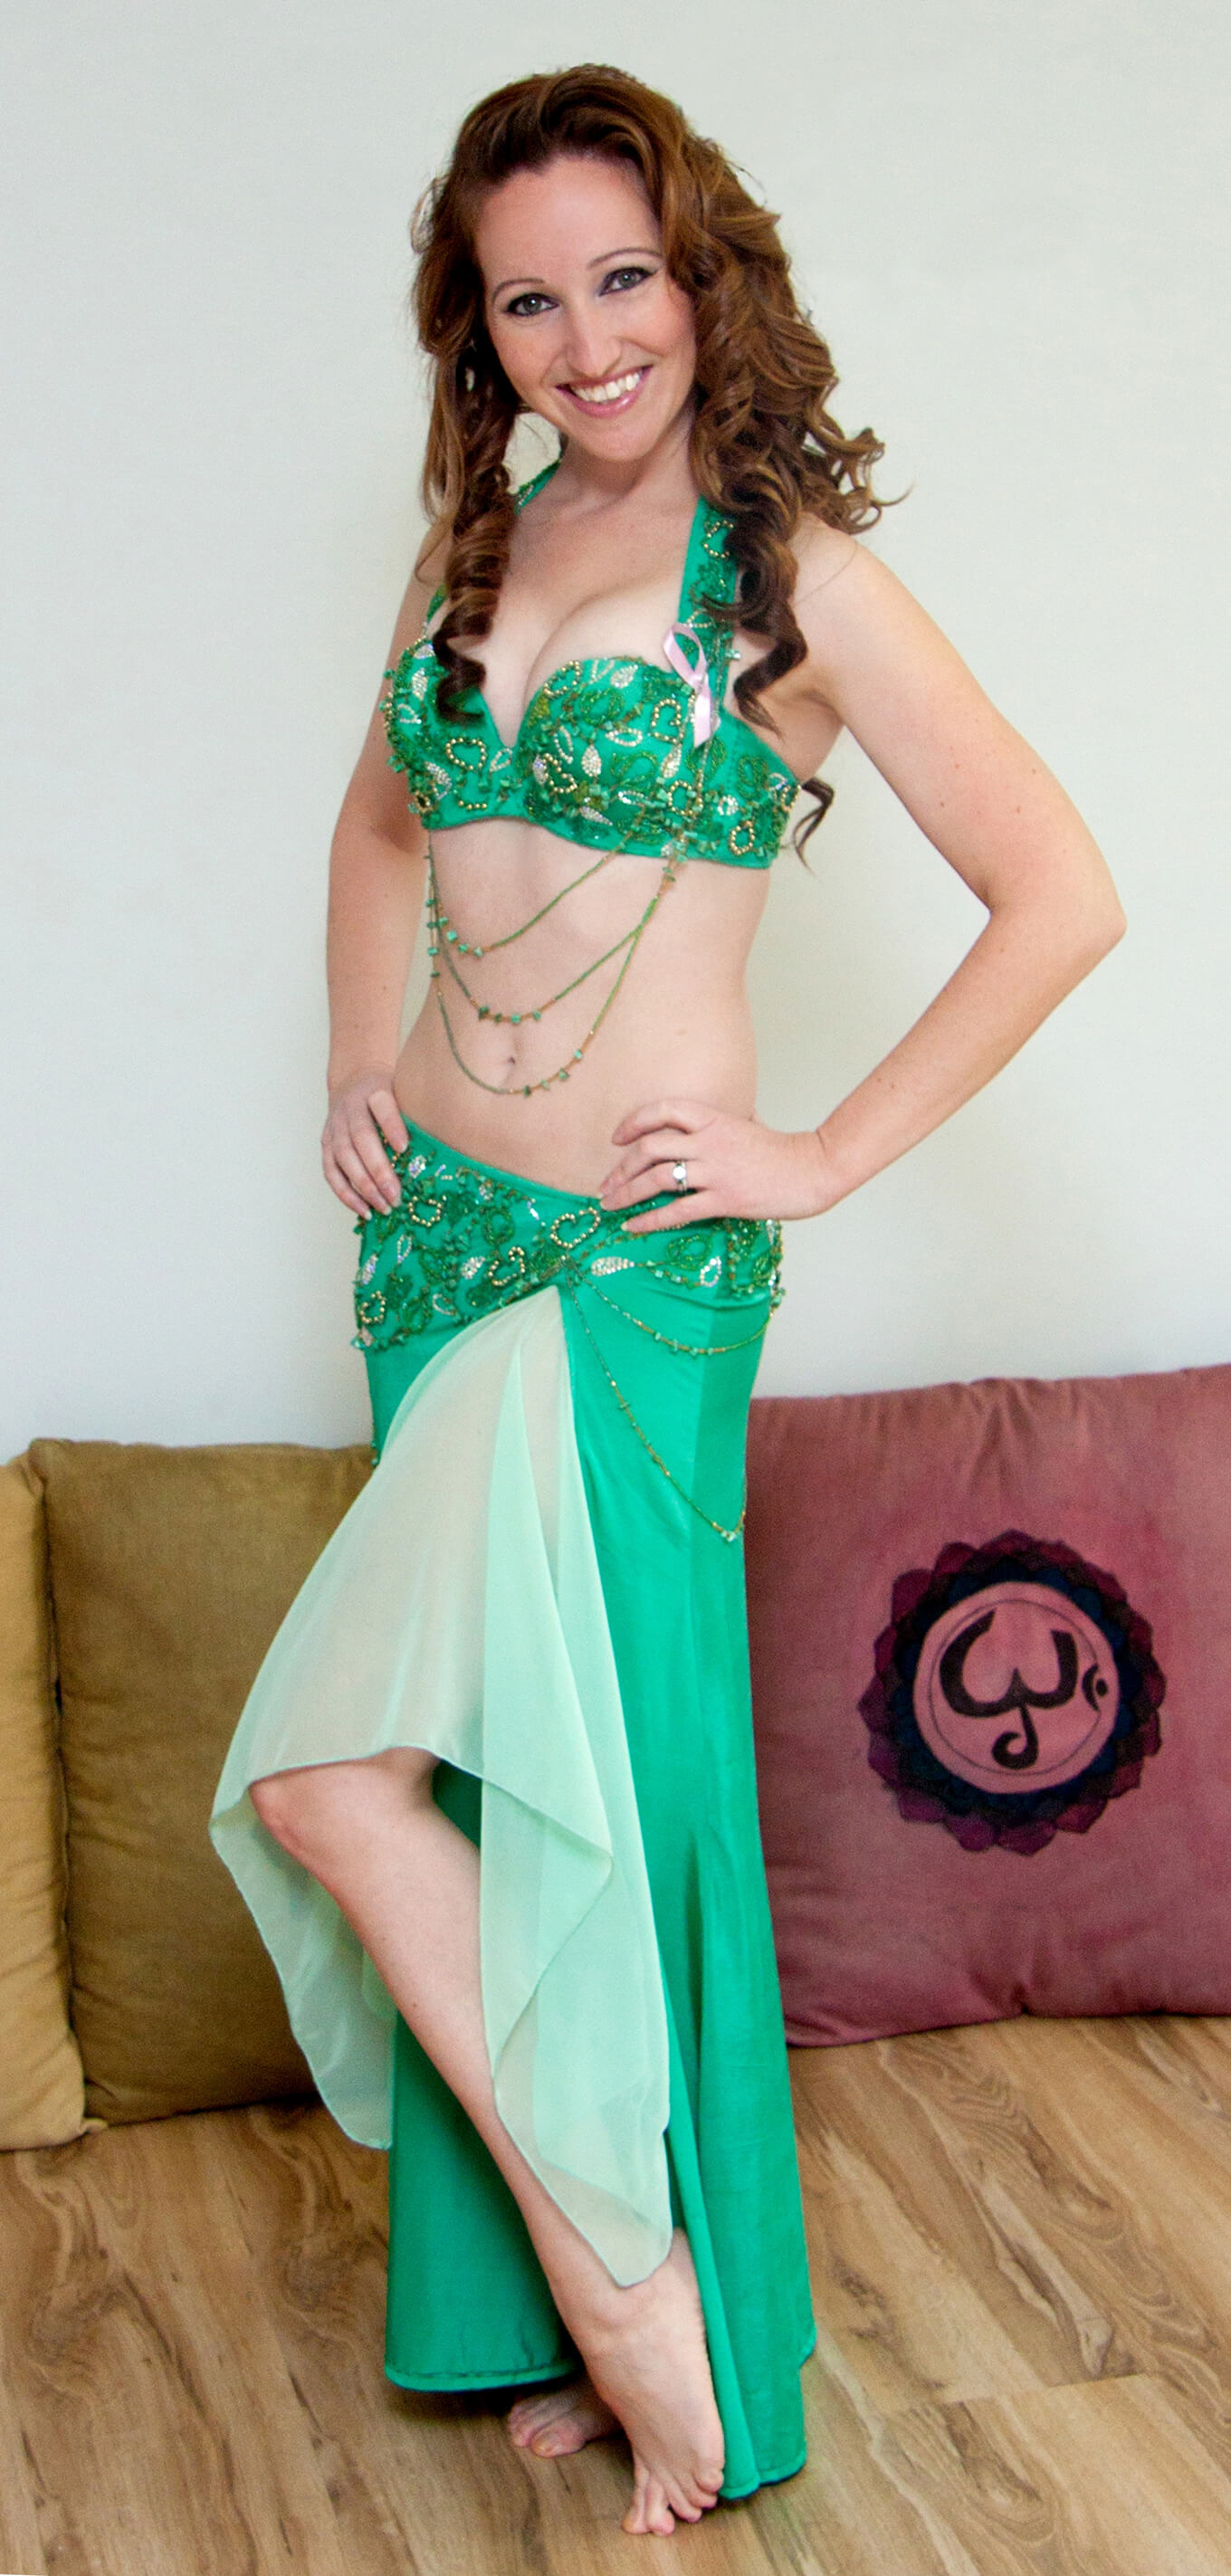 Donna in a green belly dance outfit